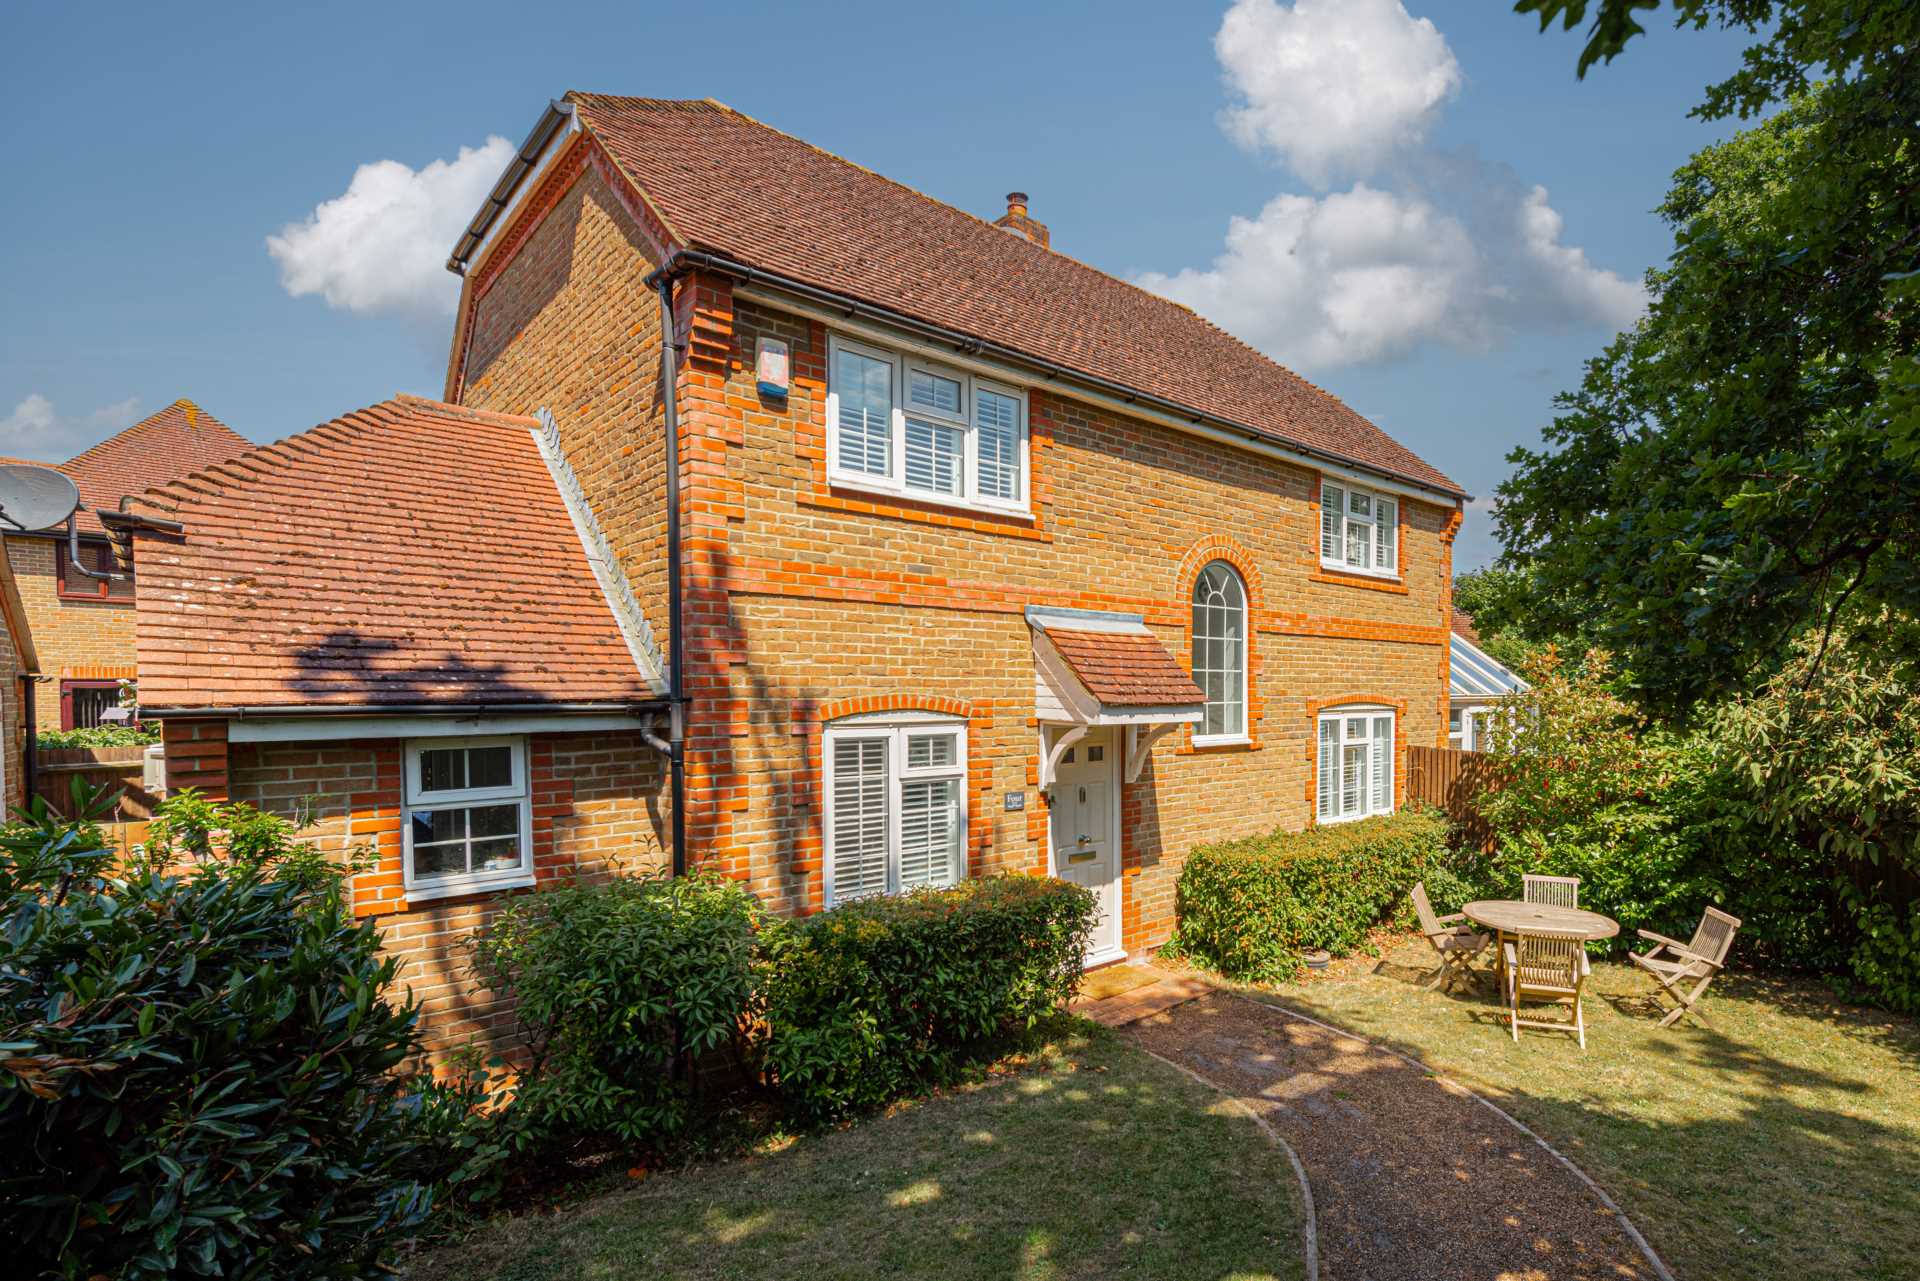 4 bed Detached House for rent in Epsom. From The Personal Agent - Epsom